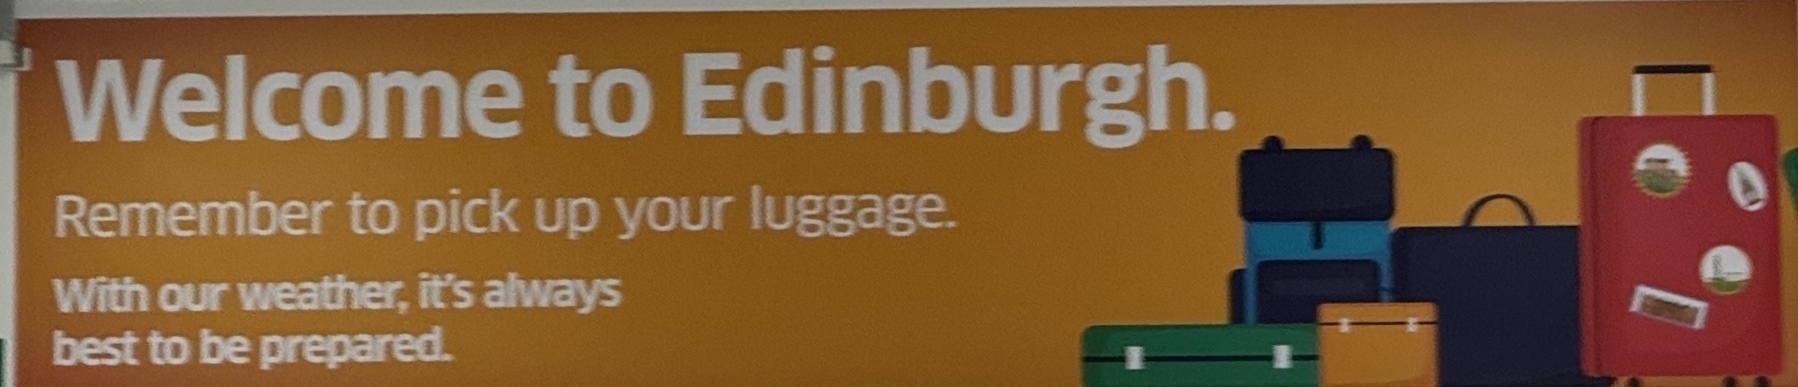 Orange sign with white text reading: Welcome to Edinburgh.&10;Remember to pick up your luggage.&10;With our weather, it's always best to be prepared.